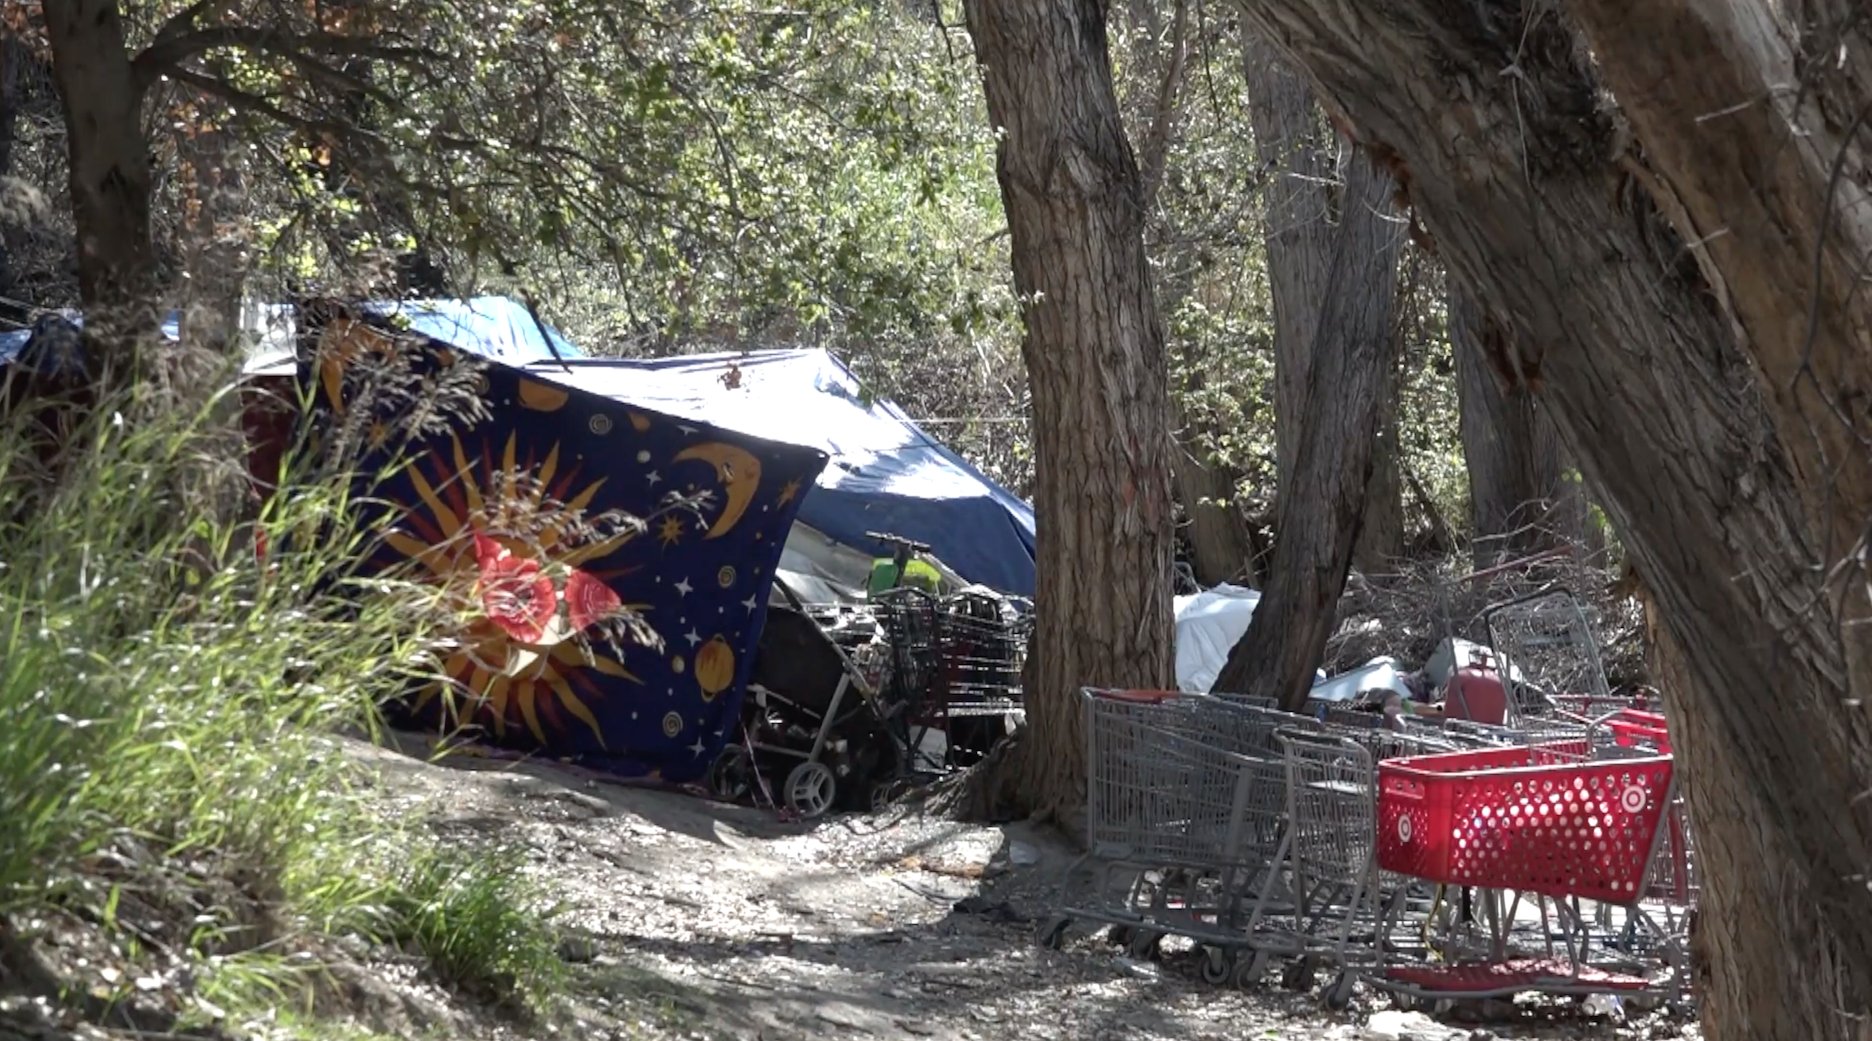 Homeless Camps Cleared for Trail Safety